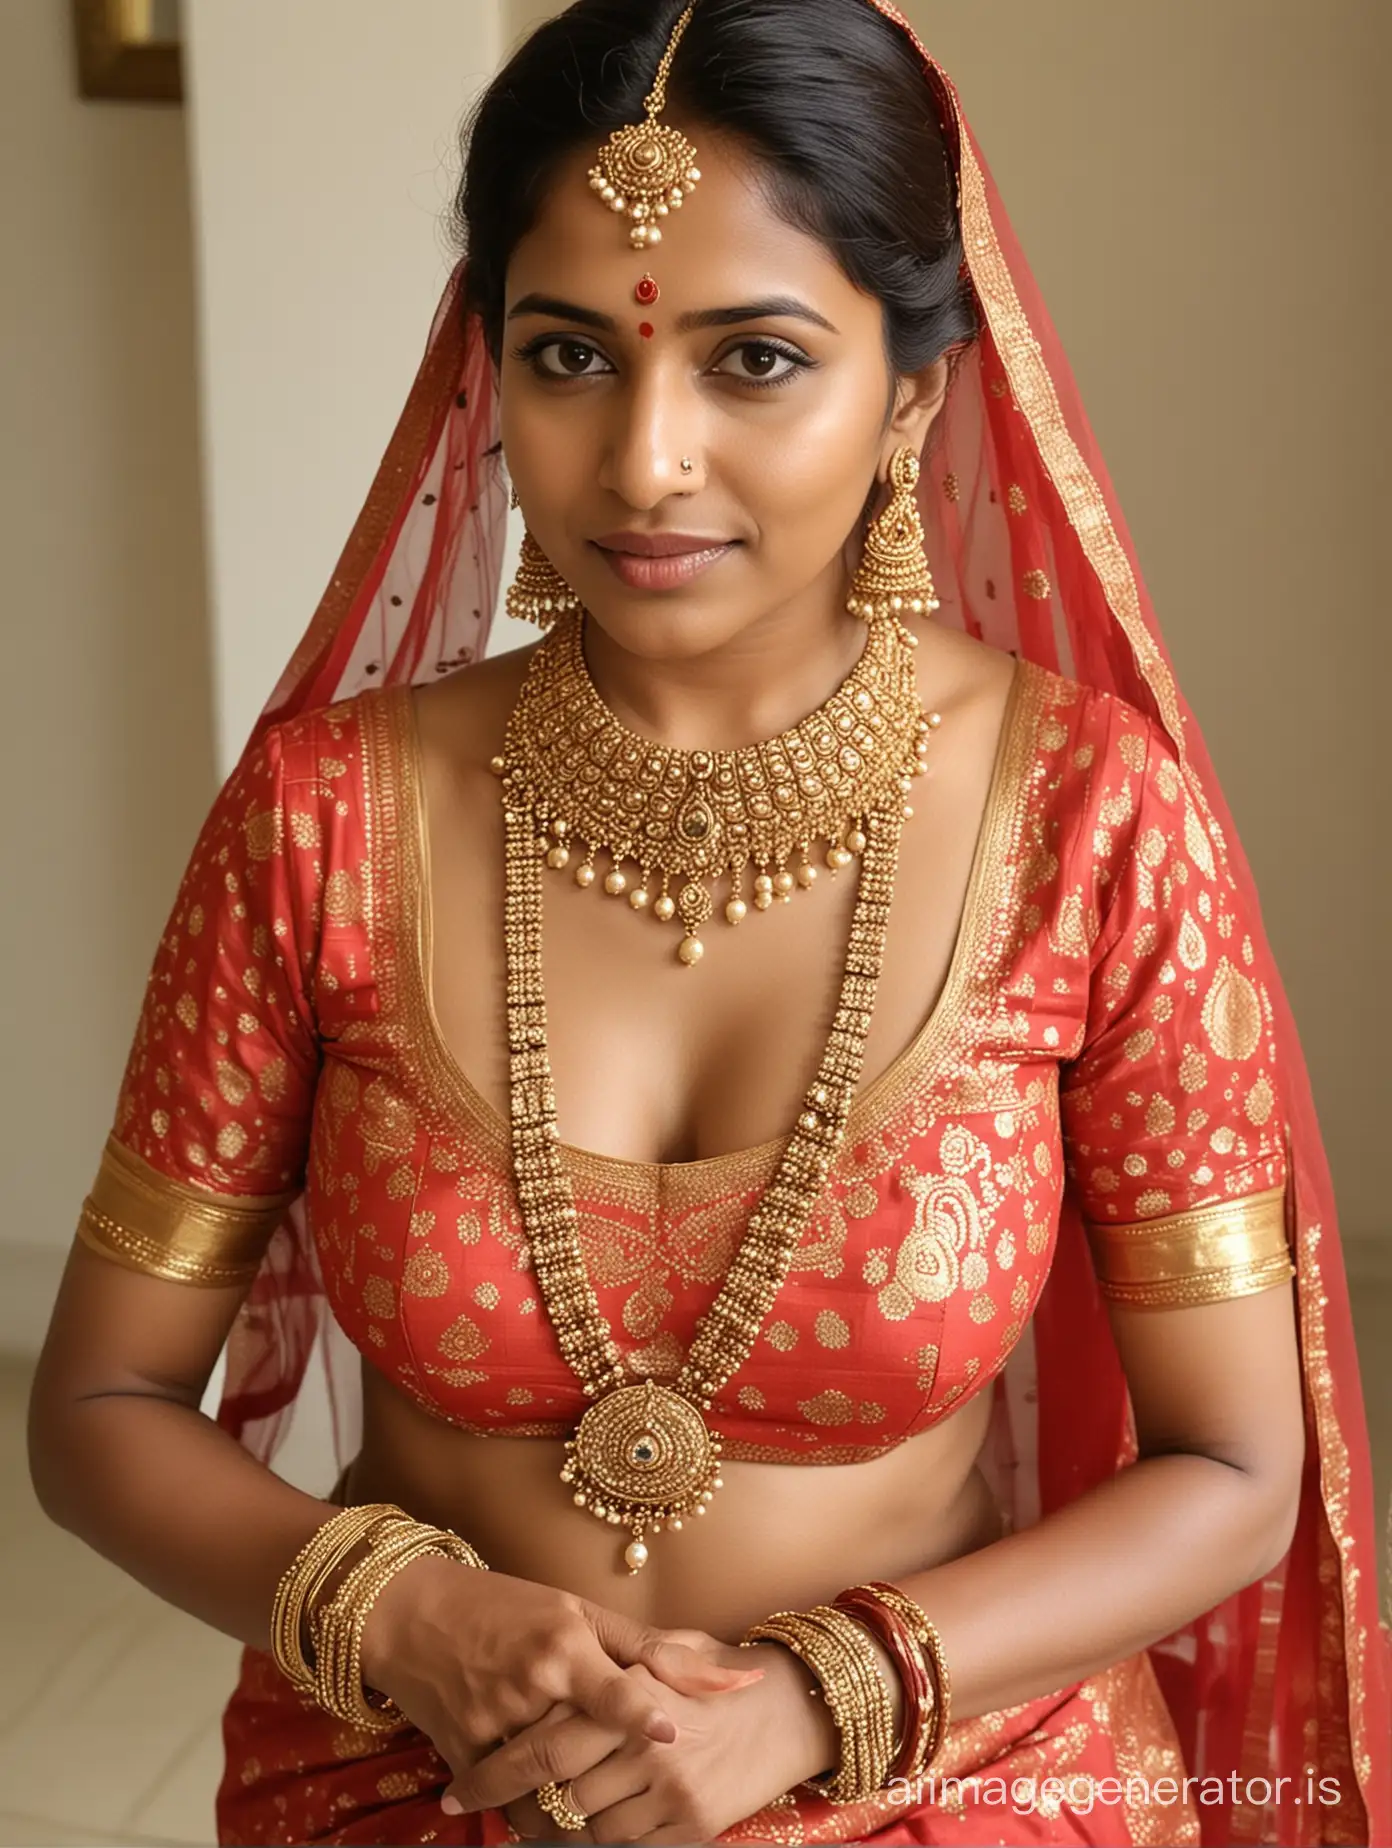 Matured South Indian fully nude in wedding jewellery 38 years old